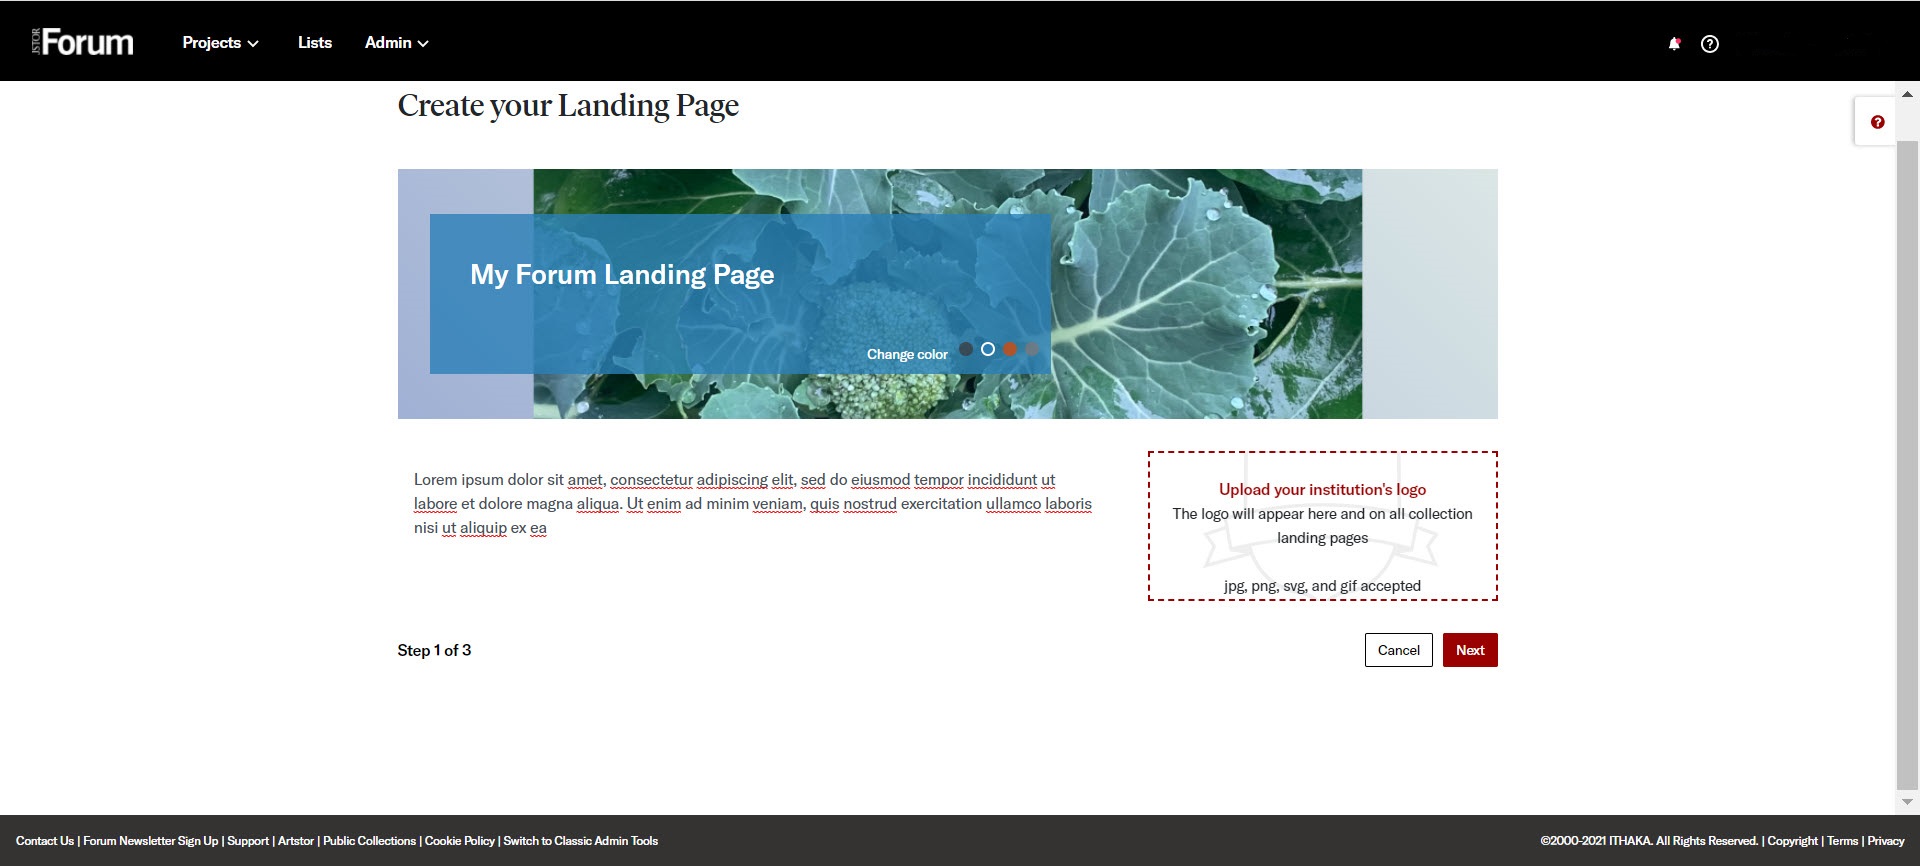 Landing page editing screen in Forum